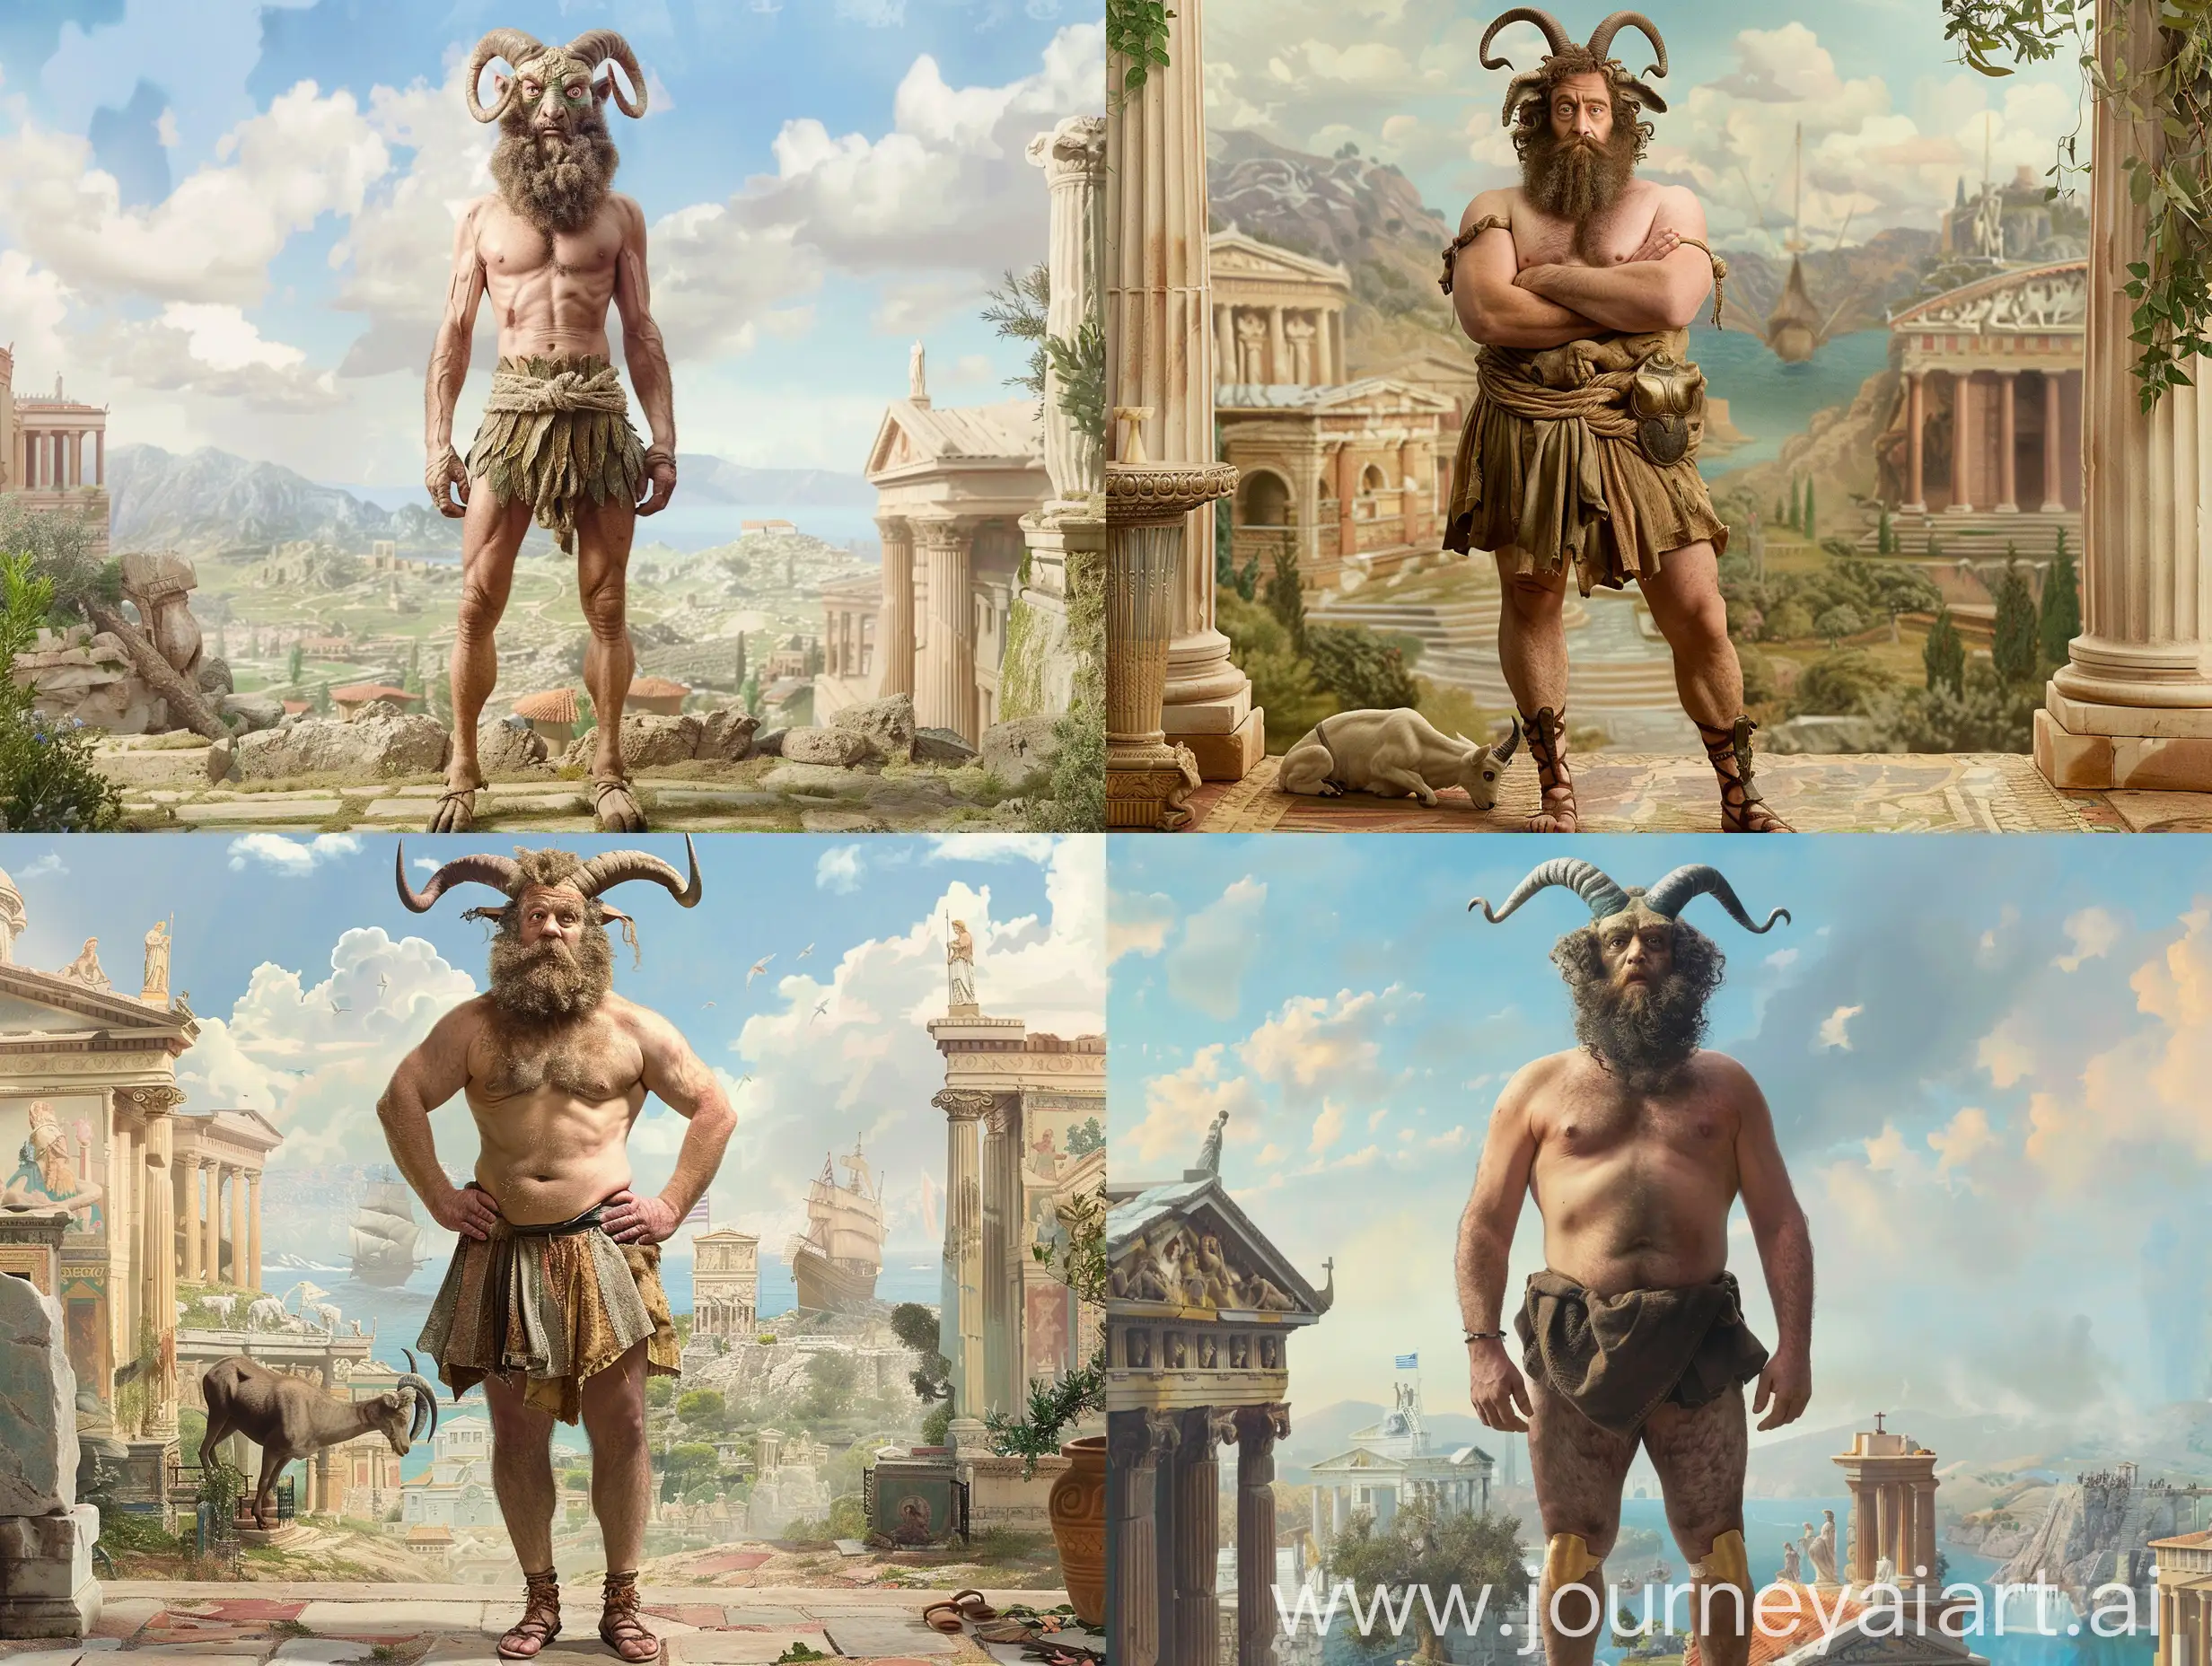 Zach Galifianakis as Philoctetes the Faun of Disneys Hercules in a Live Action Remake. a mythical creature with goat legs and small horns. He stands in front of a historical Greek backdrop